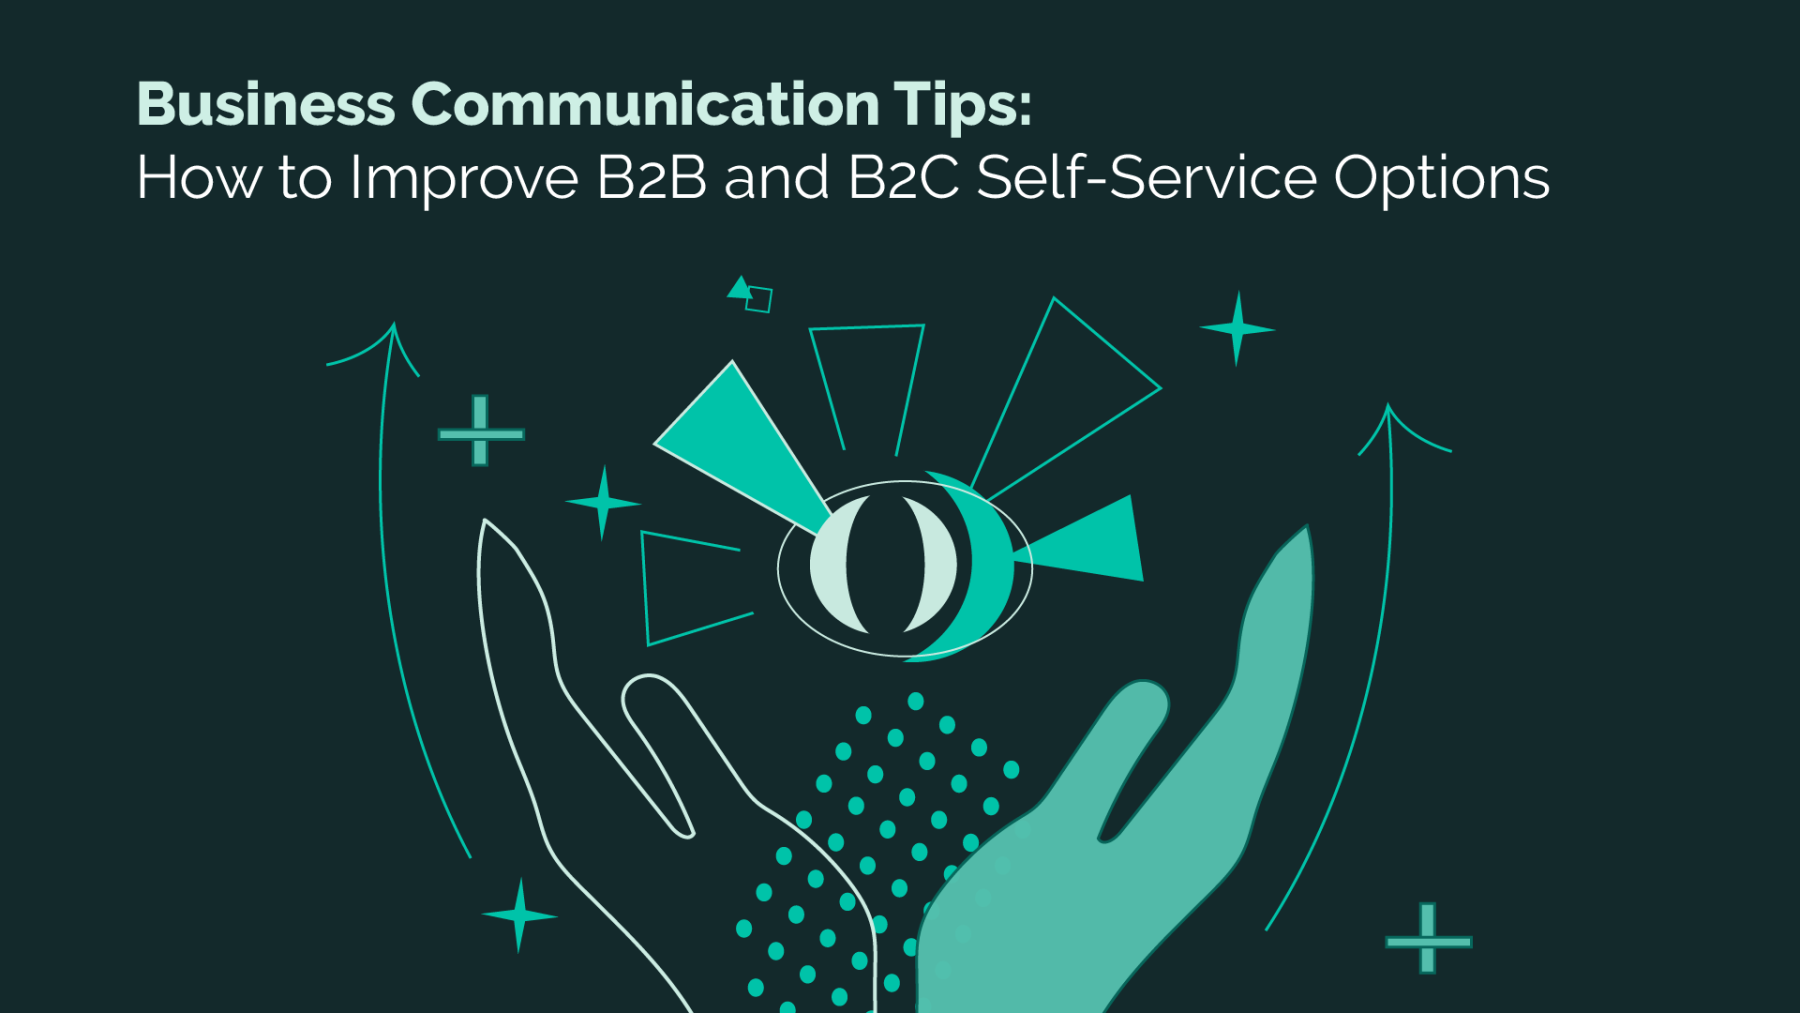 20220214.fya_.Business-Communication-Tips-How-to-Improve-B2B-and-B2C-Self-service-Options.00